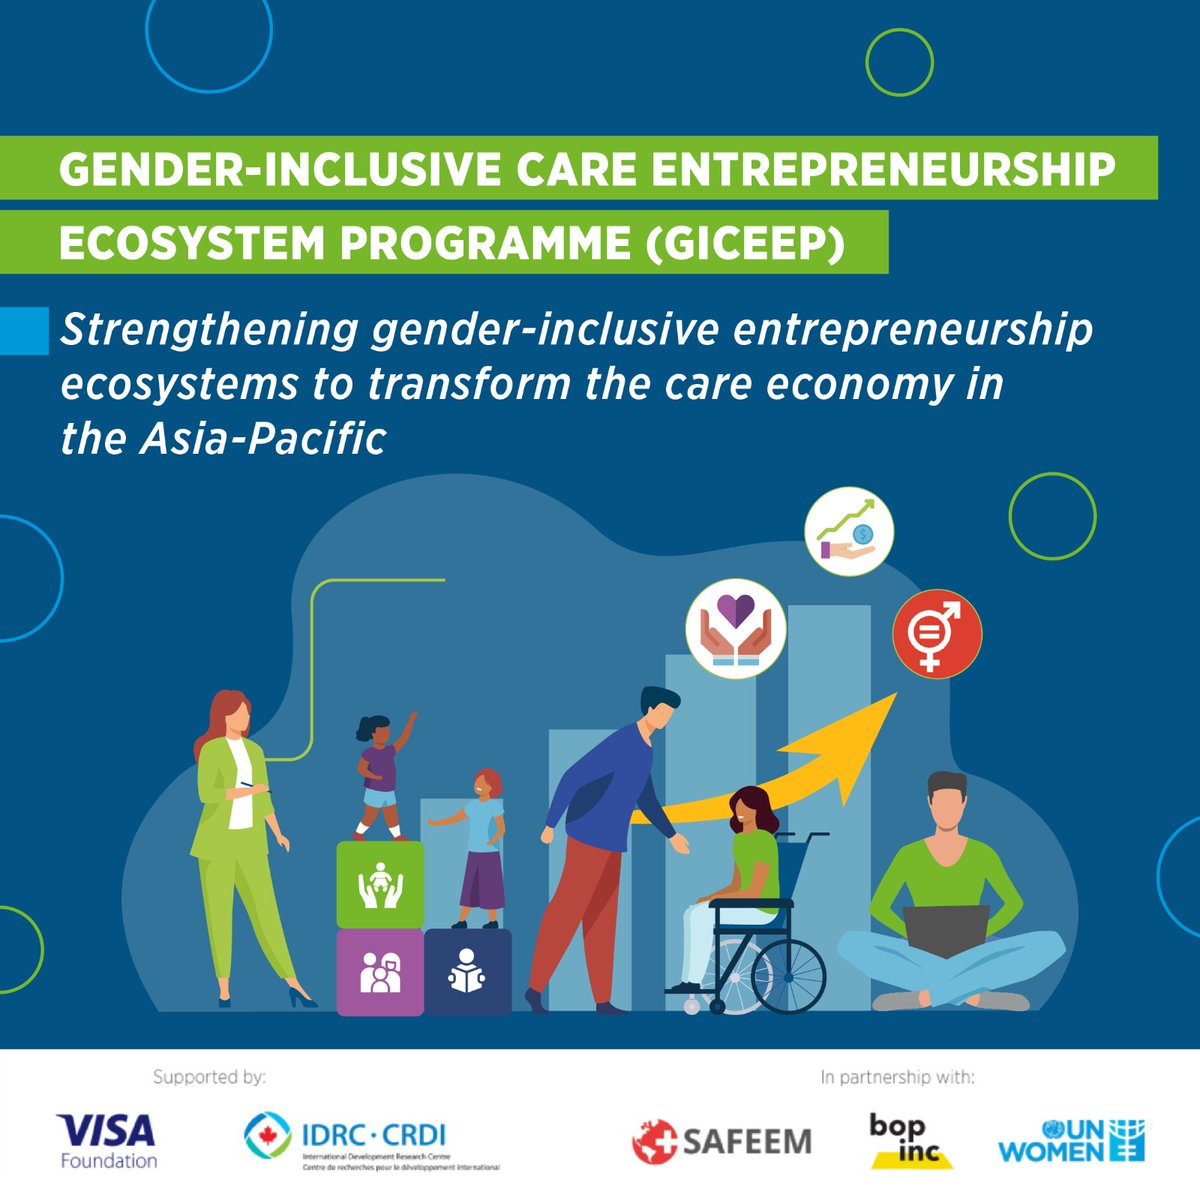 Unpaid care work is a barrier to women's economic empowerment. We need to act now!
@IDRC_CRDI and @Visa Foundation are joining forces with @Seedstars, Bopinc & @UN_Women to launch the Gender-Inclusive Care Entrepreneurship Ecosystem Programme (GICEEP)

#Care4WEE #CareAccelerator